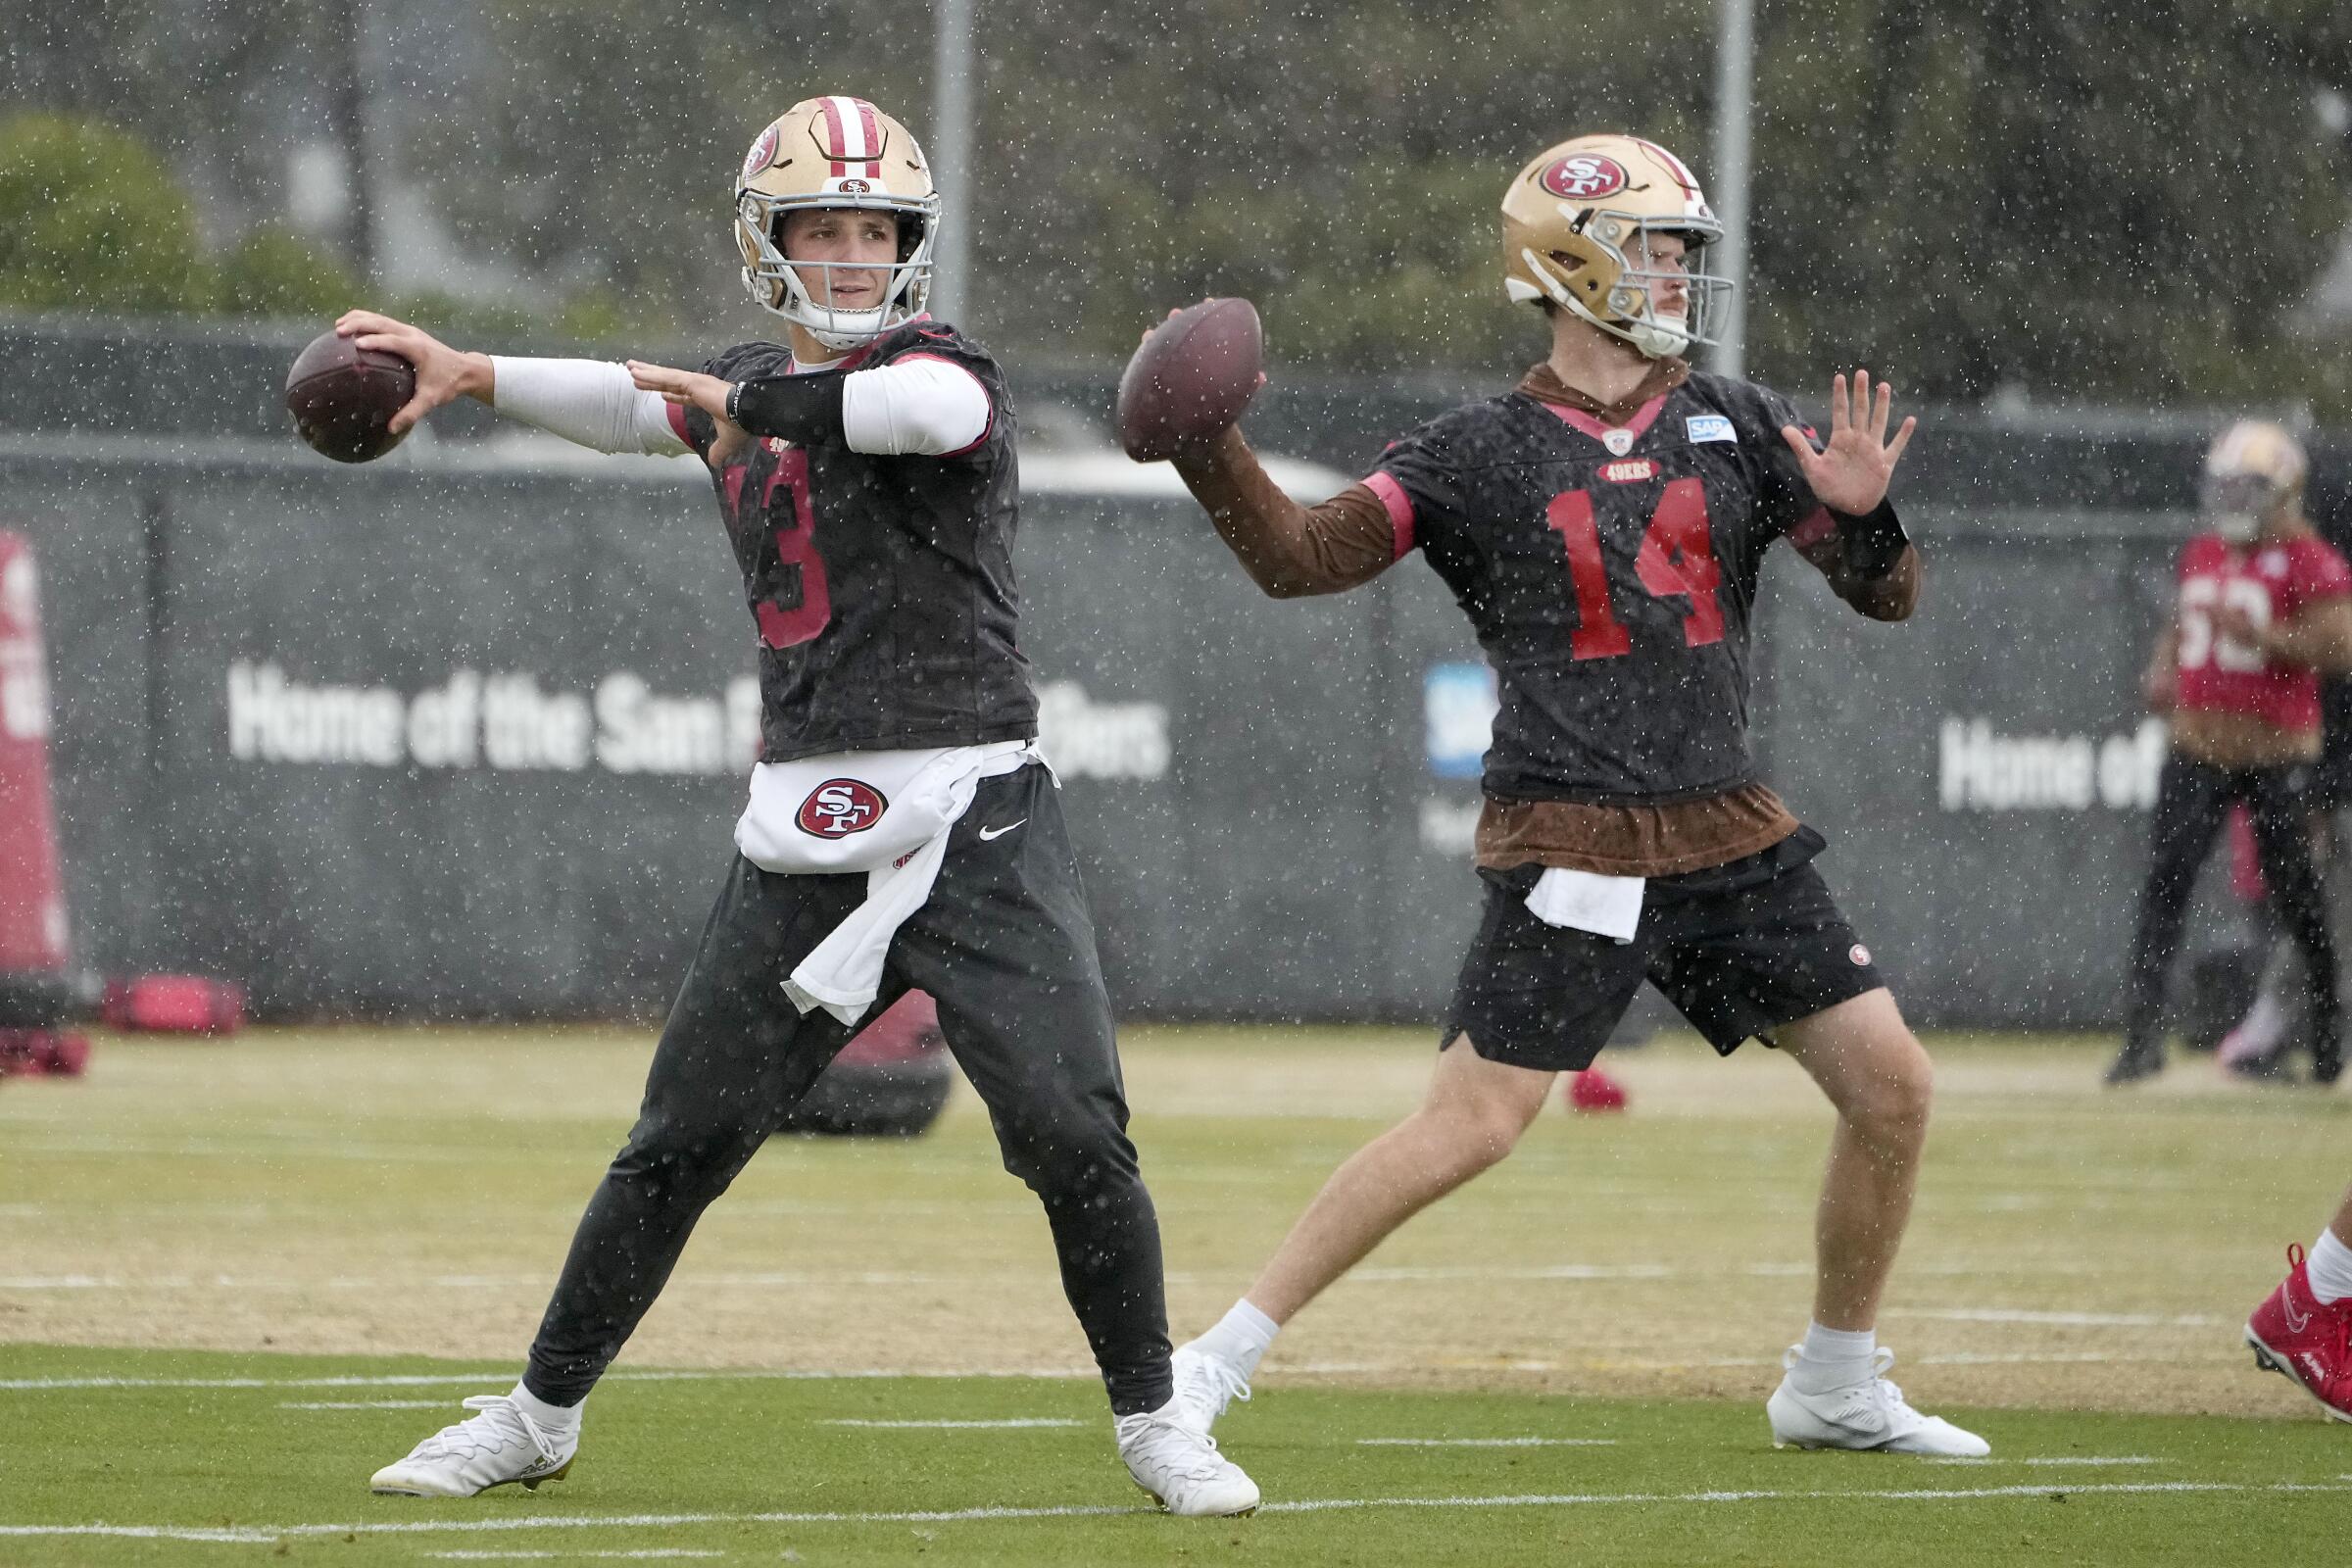 San Francisco quarterbacks Brock Purdy (13) and Sam Darnold (14) work out side by side in practice.